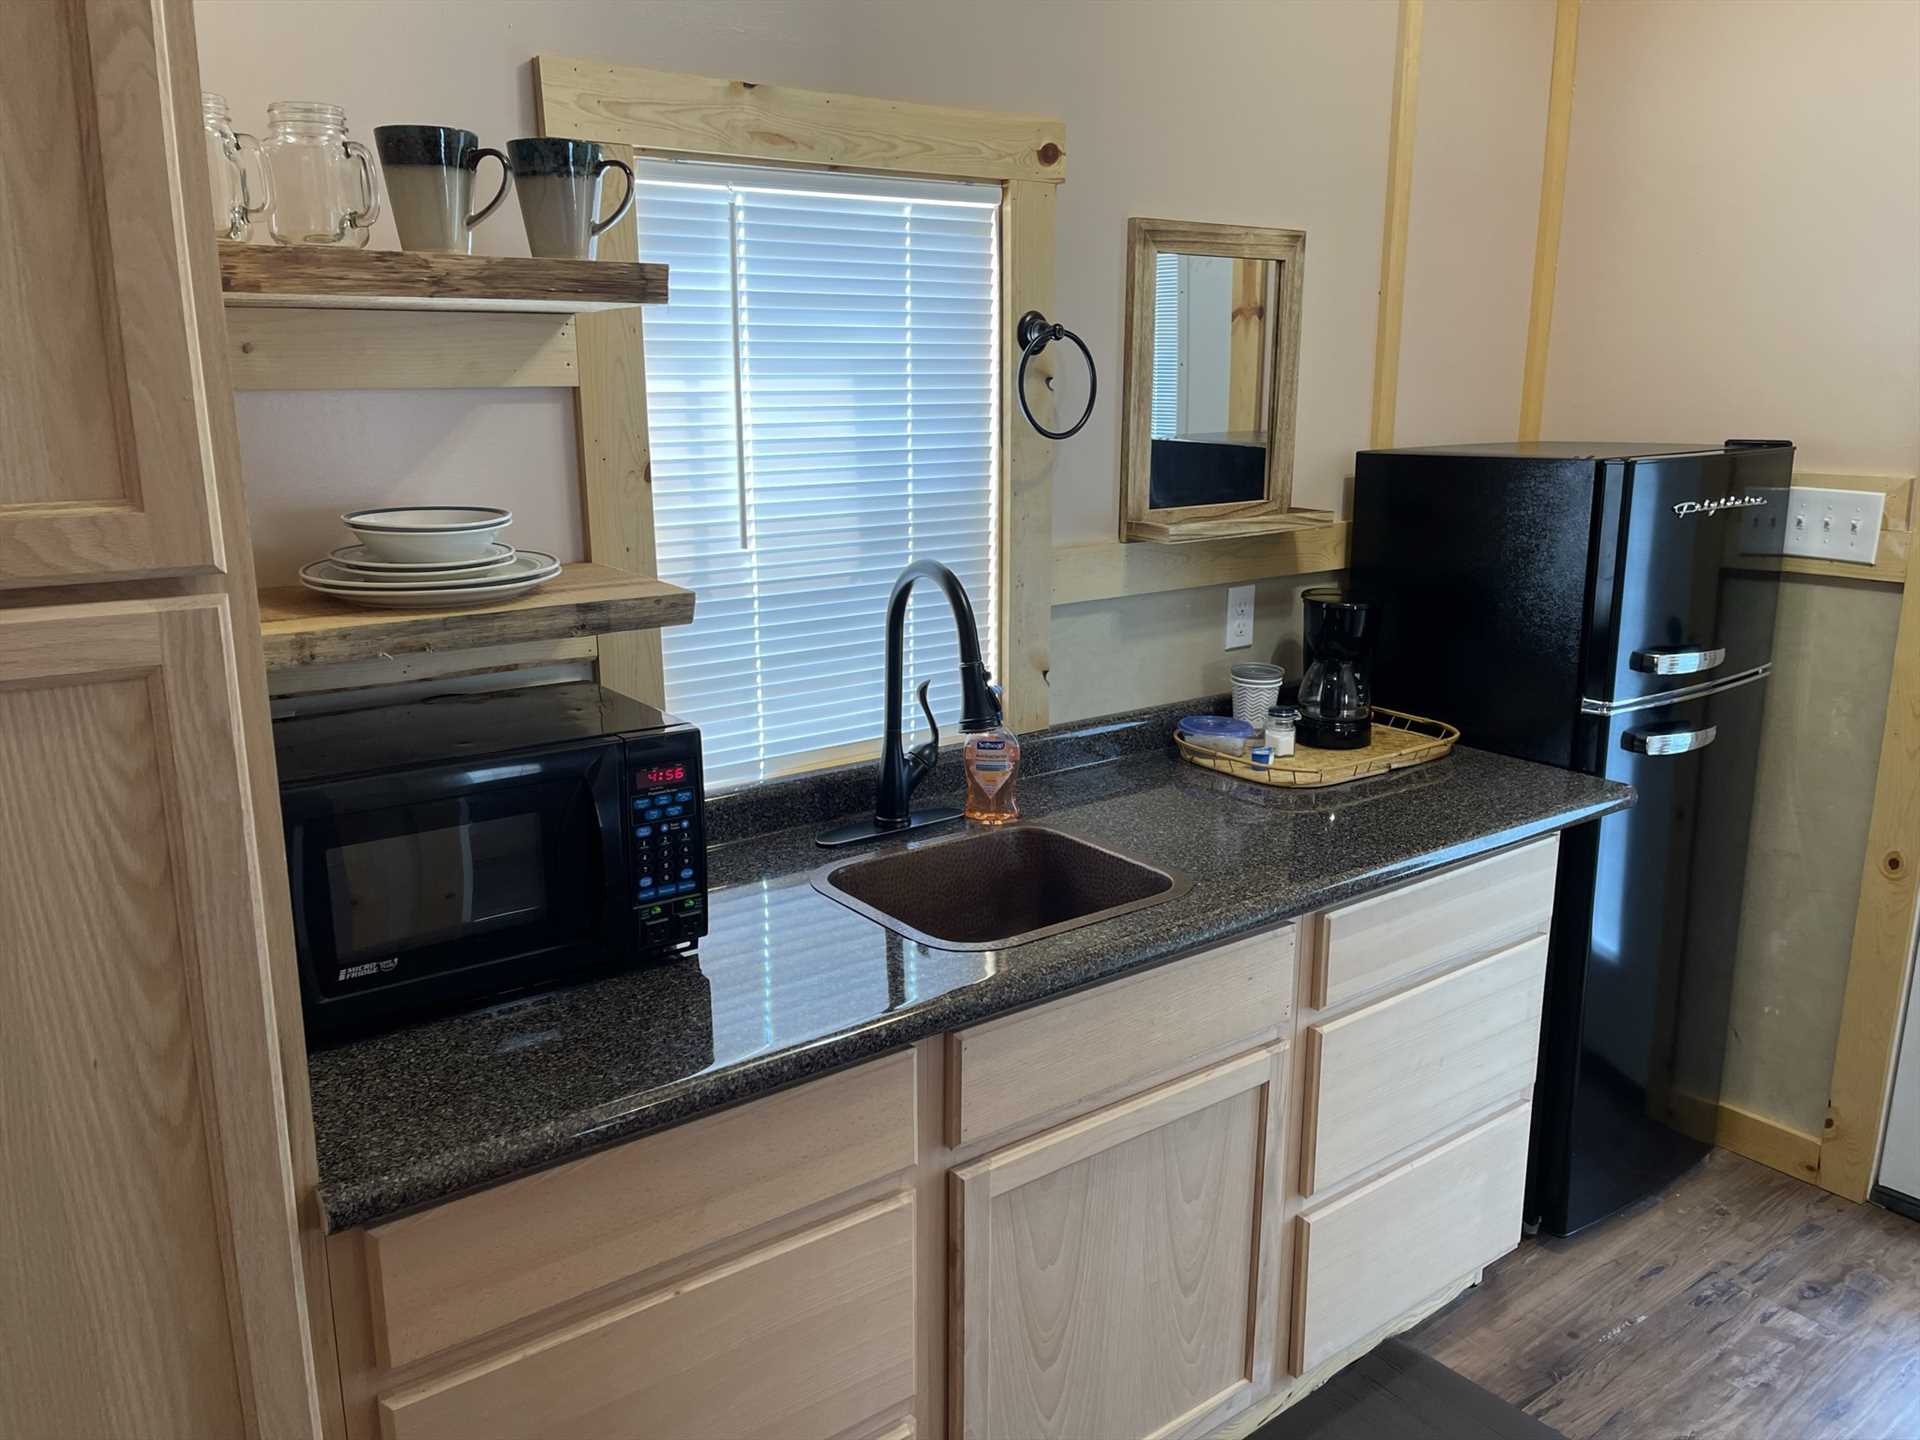                                                 You'll have a stylish and functional kitchen here, with a fridge, microwave, coffee machine, and serving ware!